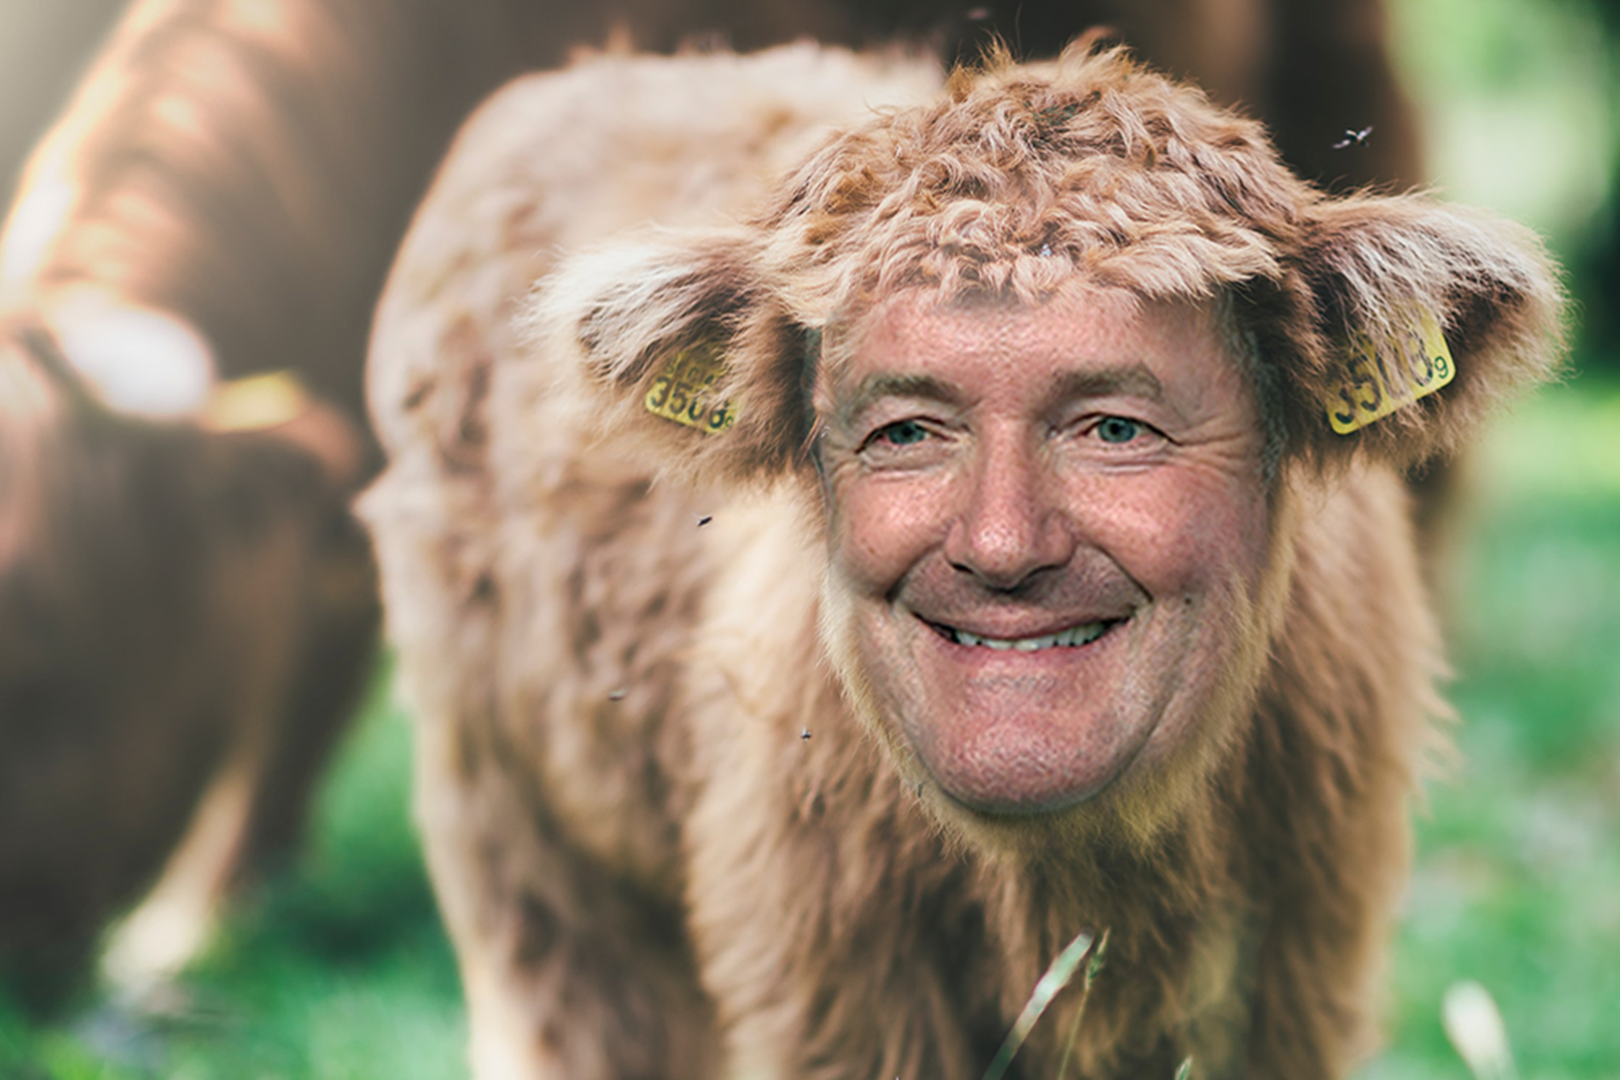 Piers Morgan reveals he is a baby cow